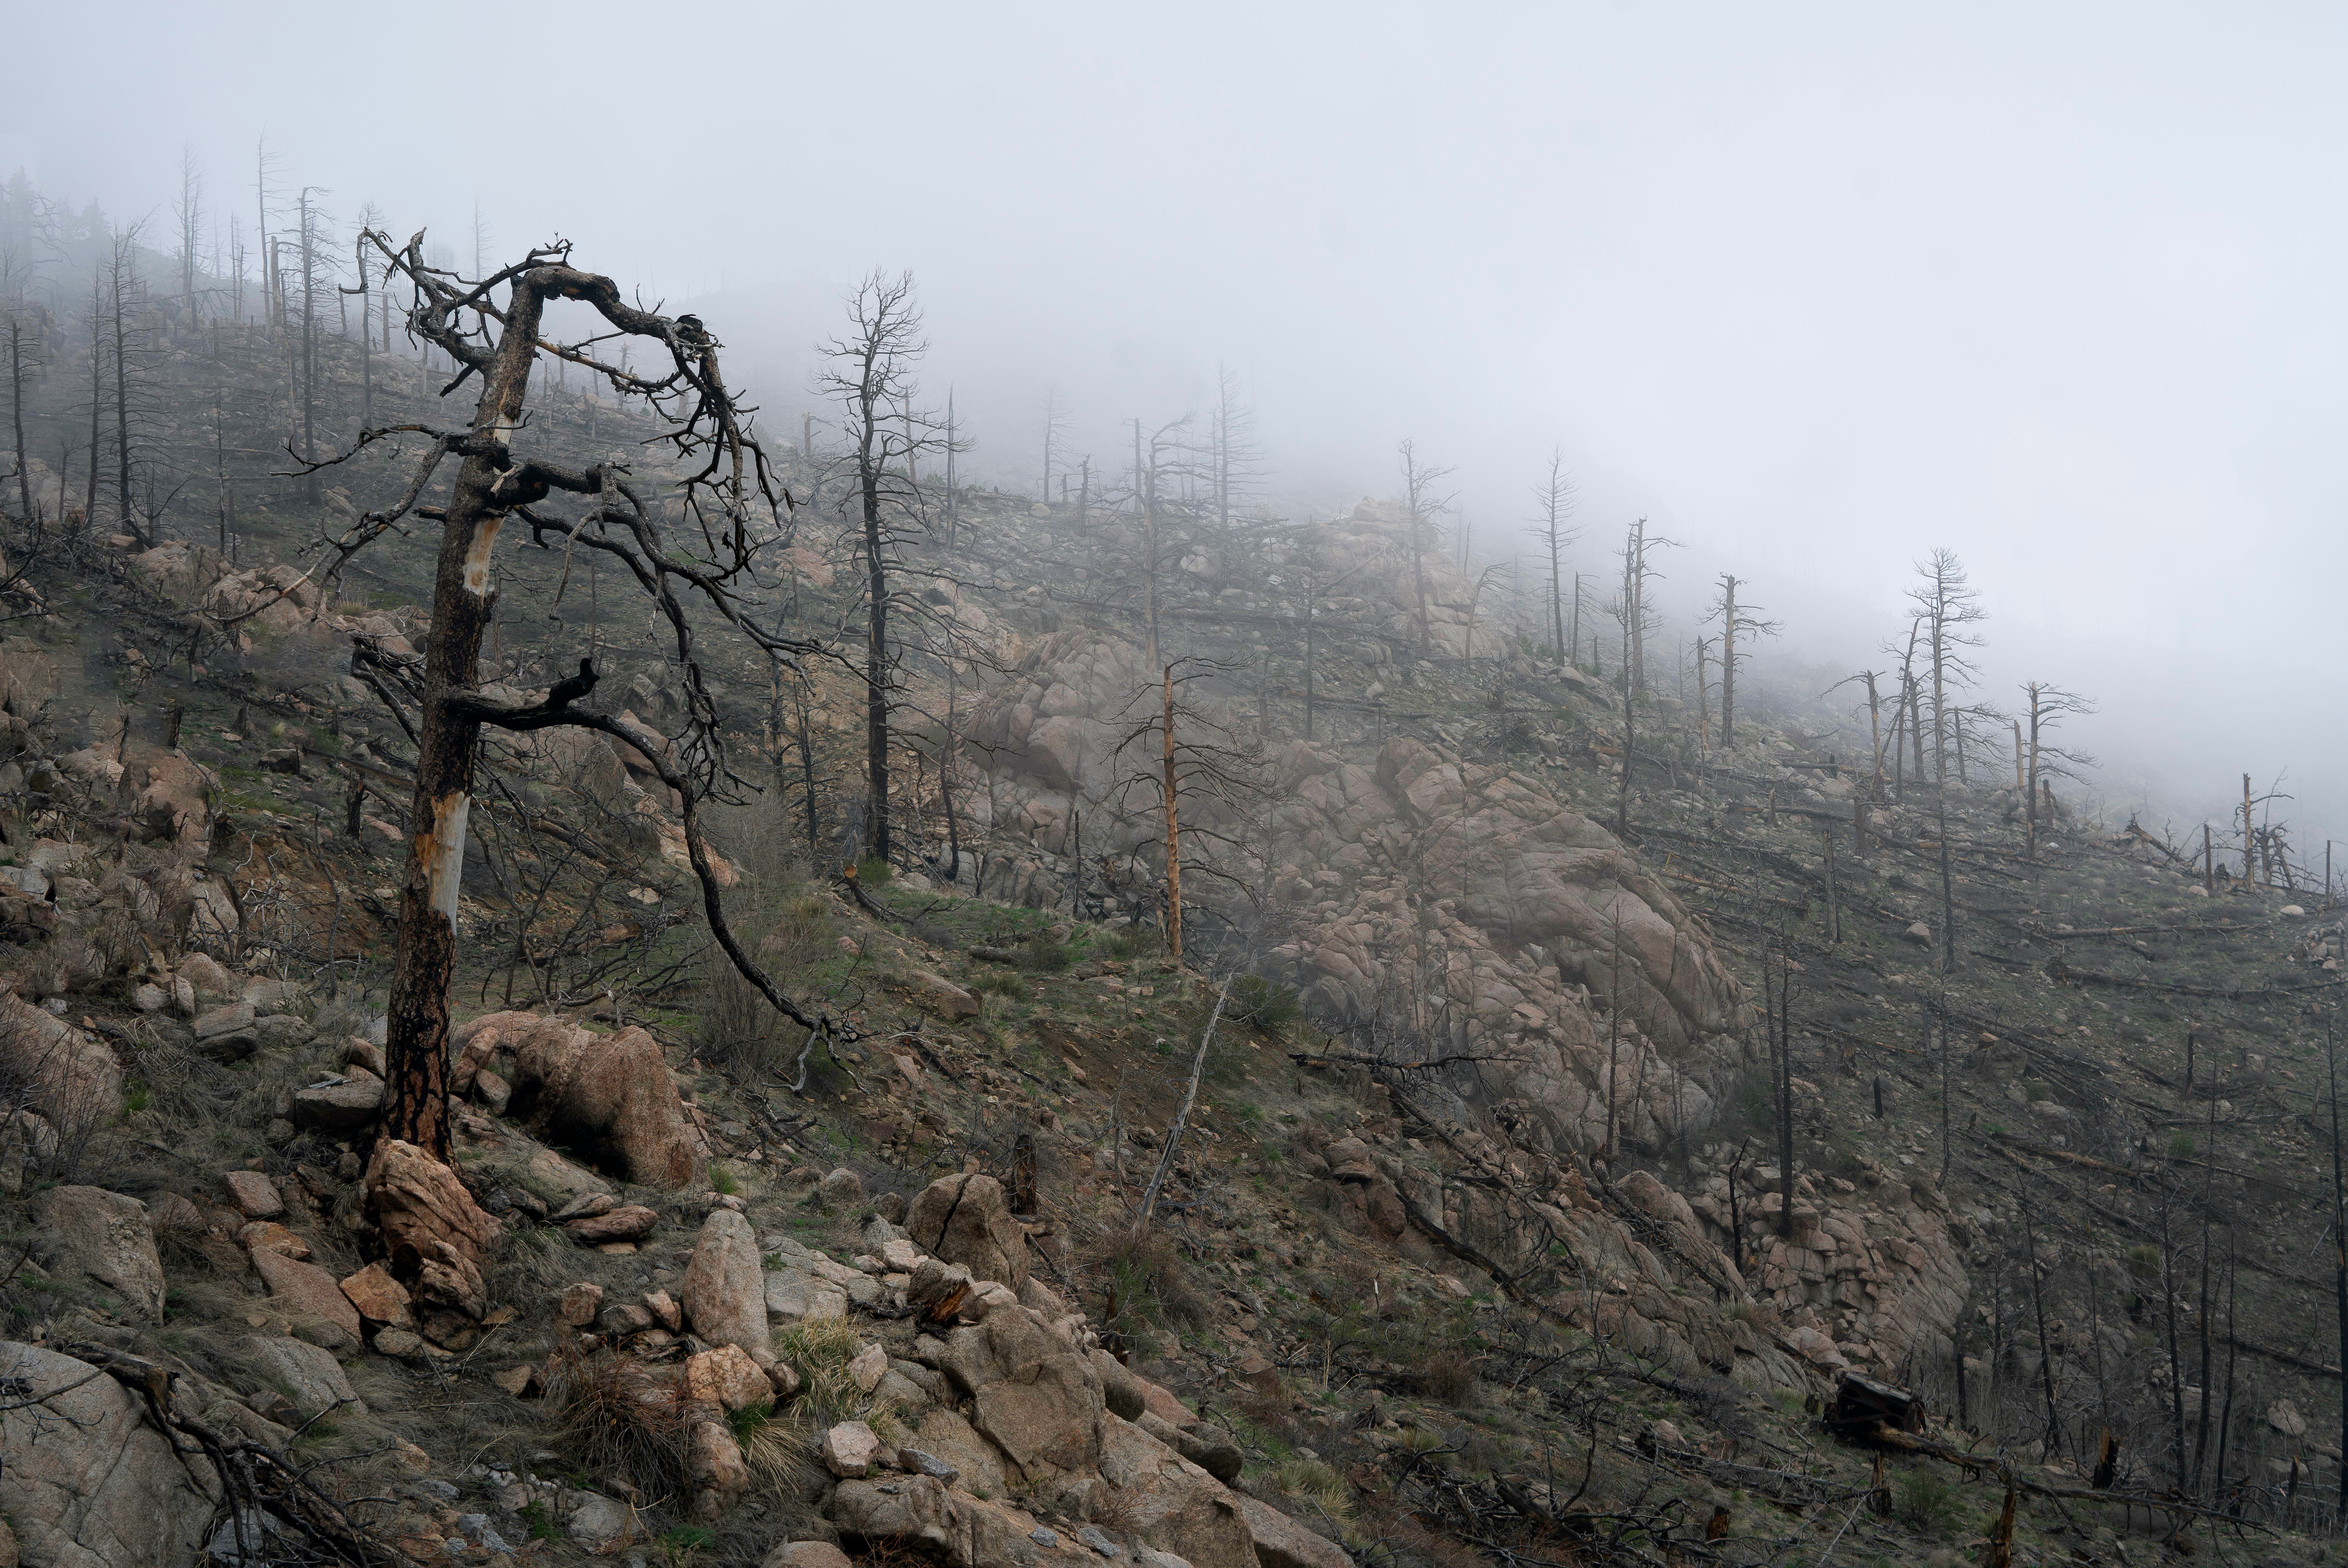 A mountainside impacted by BC forest fires, with burned trees and surrounding fog